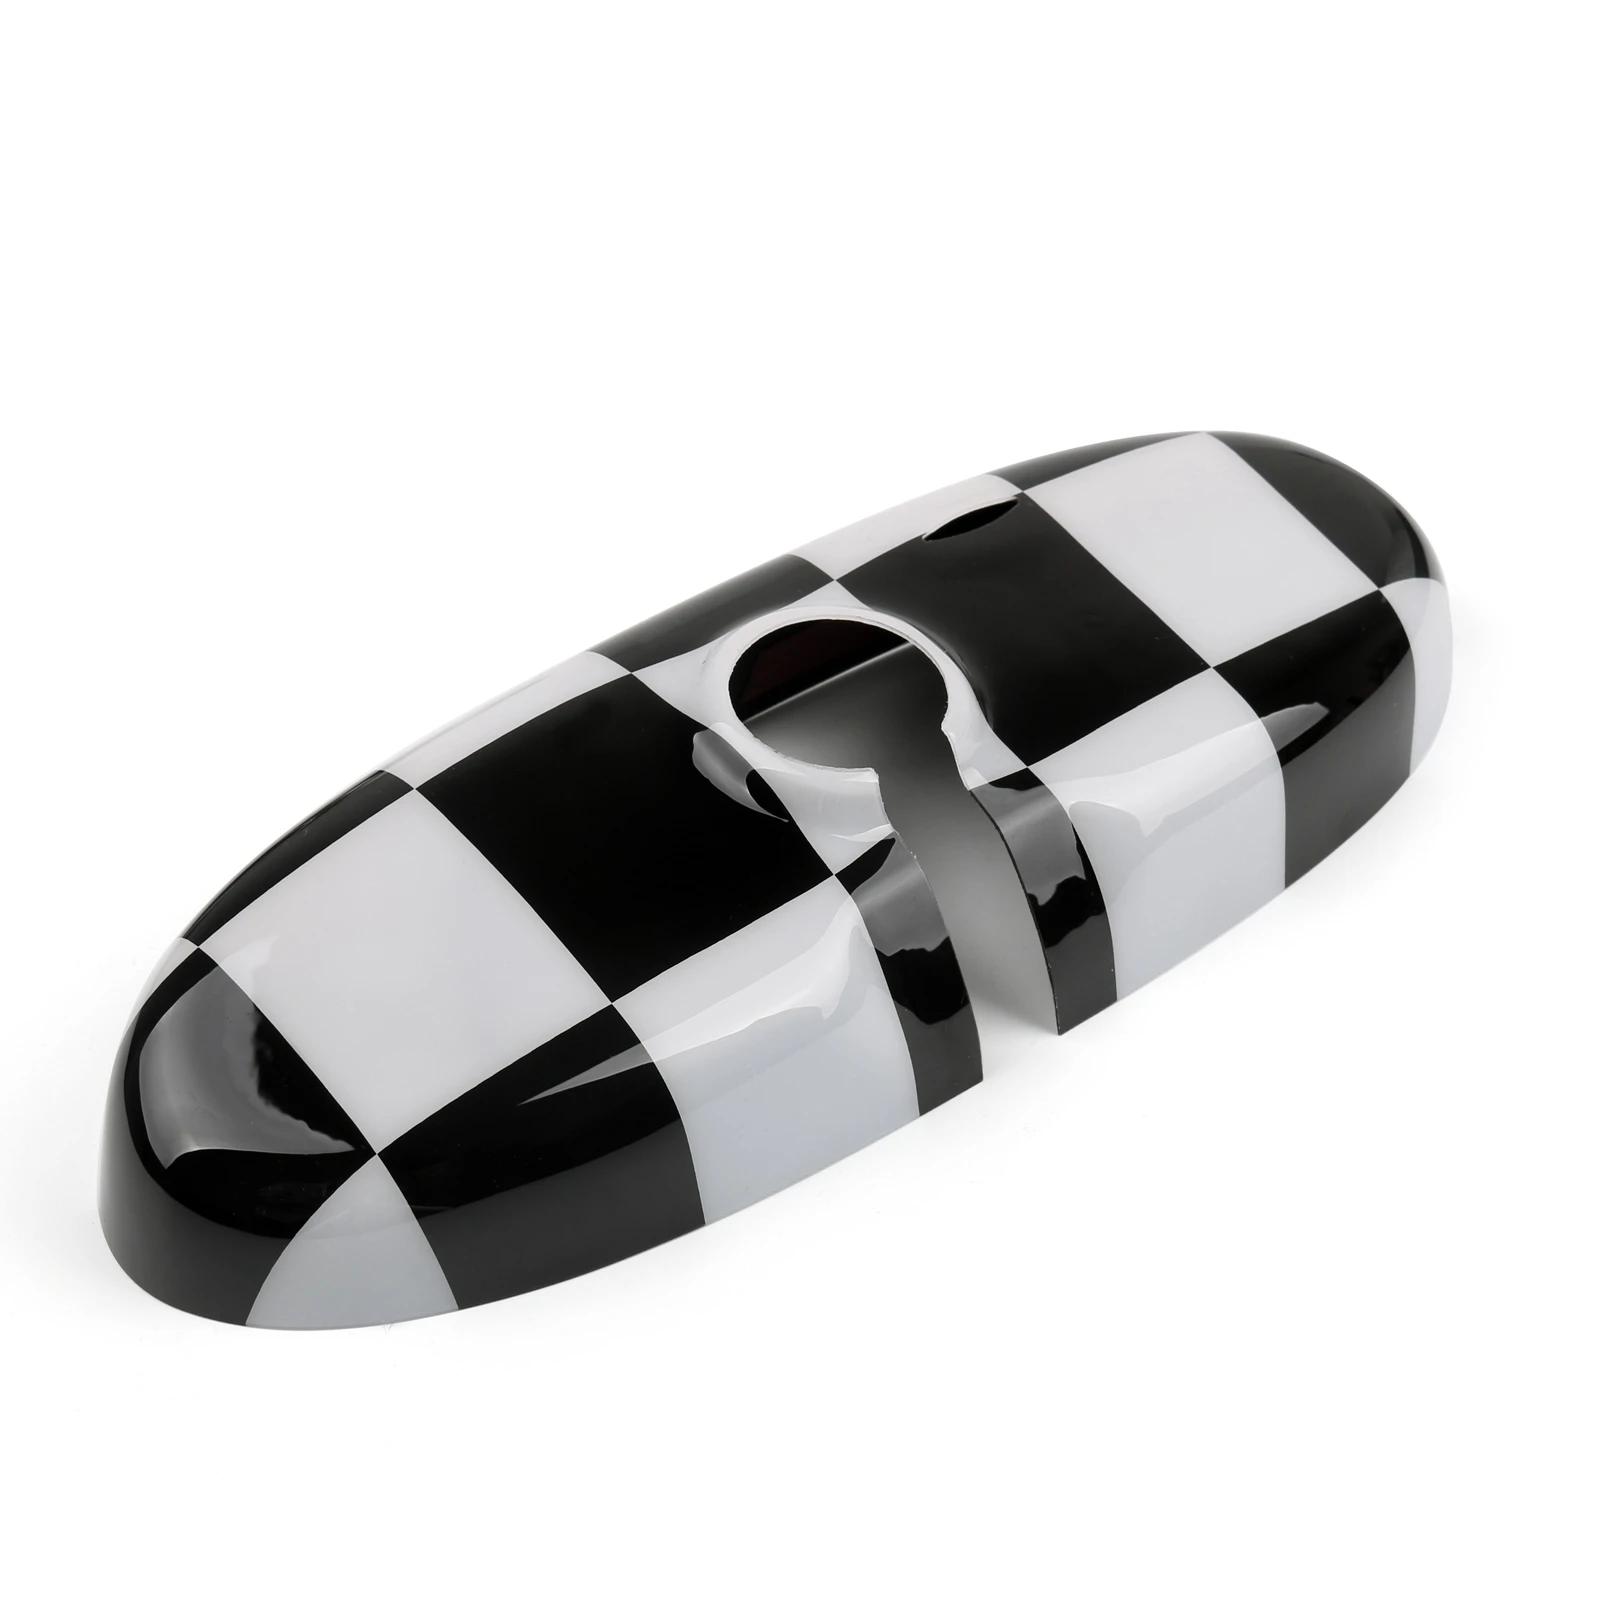 

Areyourshop Black Checkered Pattern Rear View Mirror Cover For BMW MINI Cooper R55 R56, Blk-whi